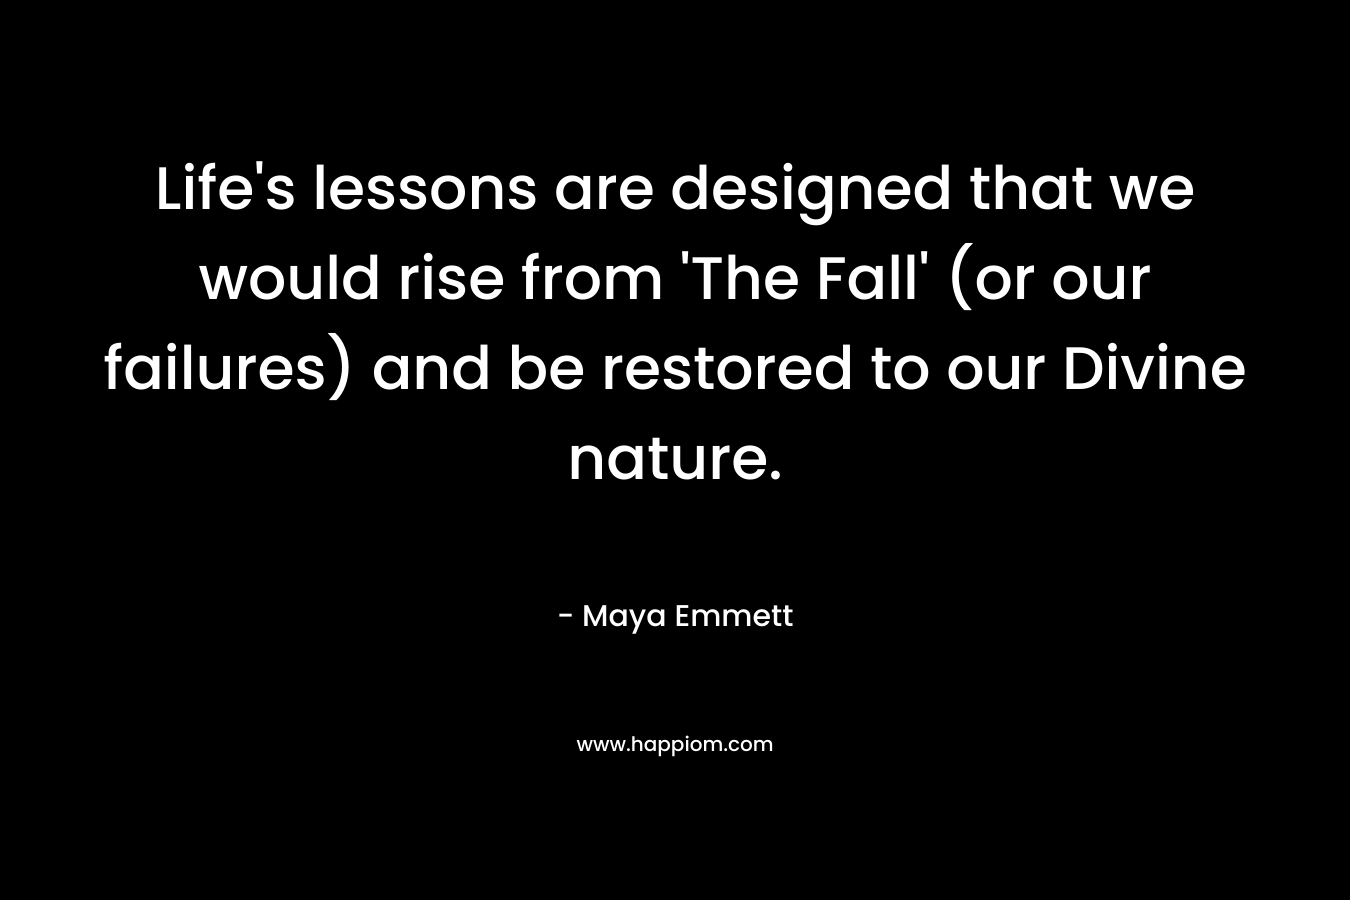 Life's lessons are designed that we would rise from 'The Fall' (or our failures) and be restored to our Divine nature.